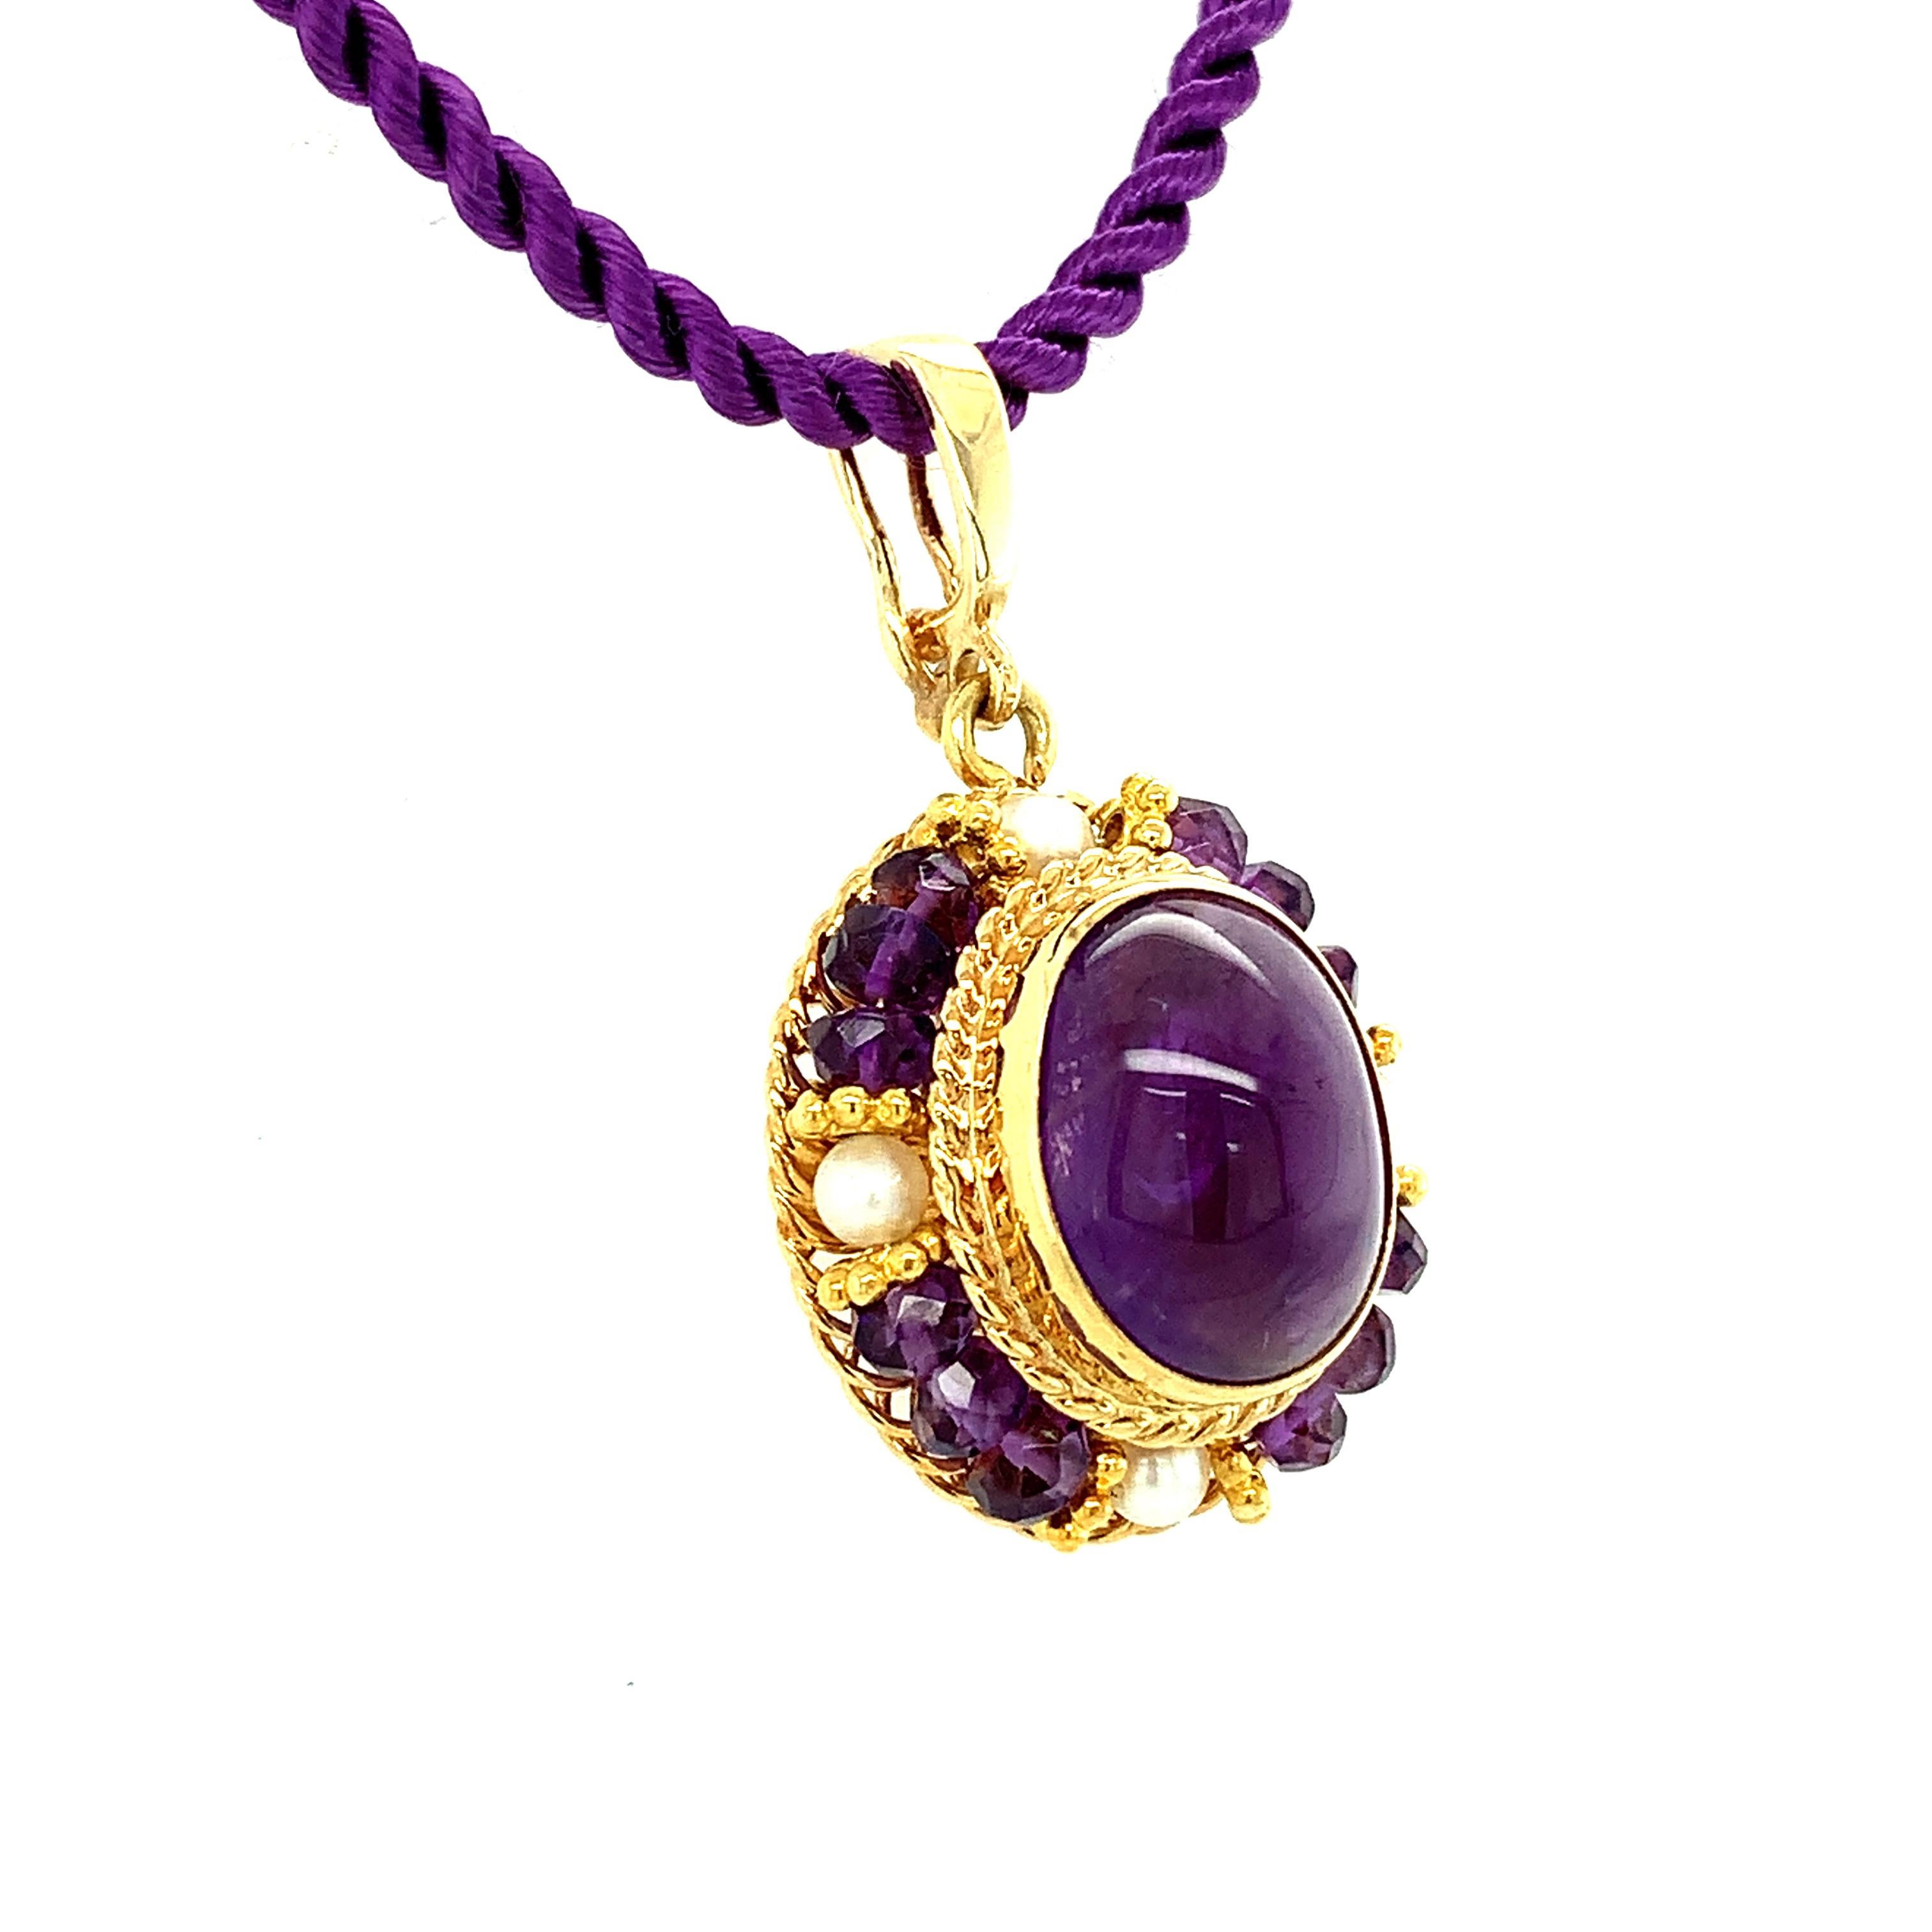 This elegant drop pendant features an oval amethyst cabochon with beautiful rich purple color, bezel set in a lovely handmade filigree setting. Amethyst beads and seed pearls are arranged in a halo frame around the center gem, accented with fine 18k